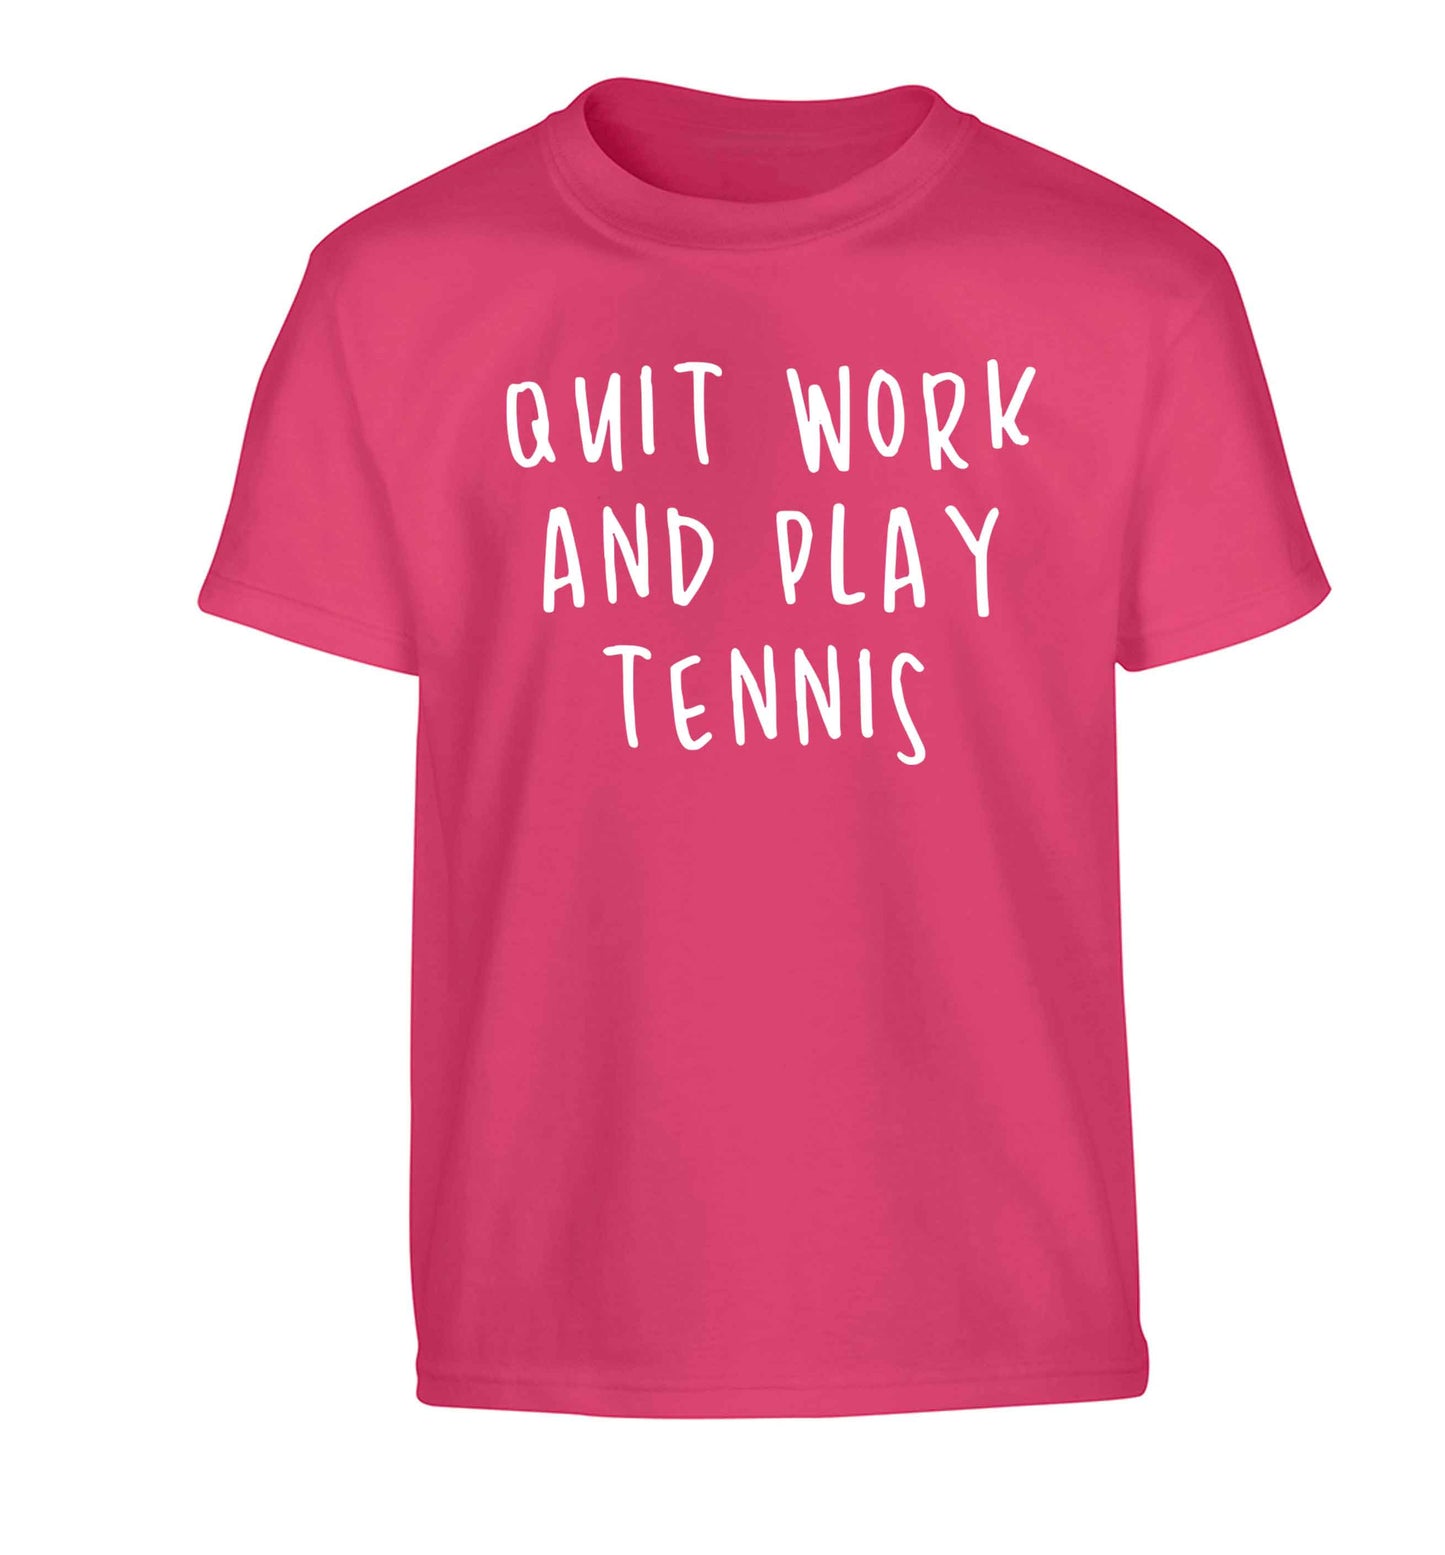 Quit work and play tennis Children's pink Tshirt 12-13 Years